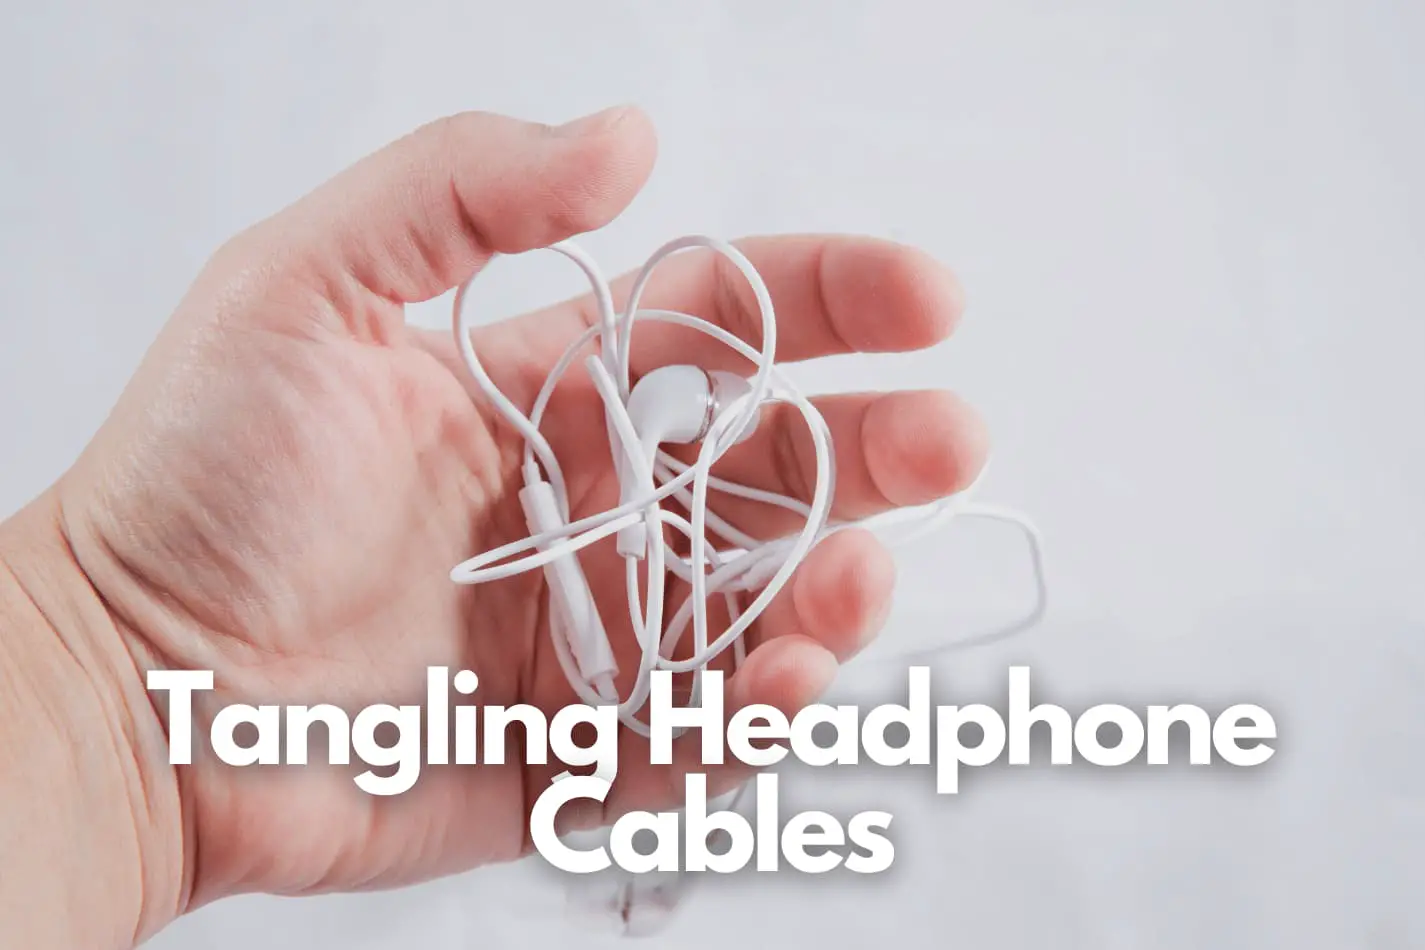 How to Stop Your Earbuds From Tangling